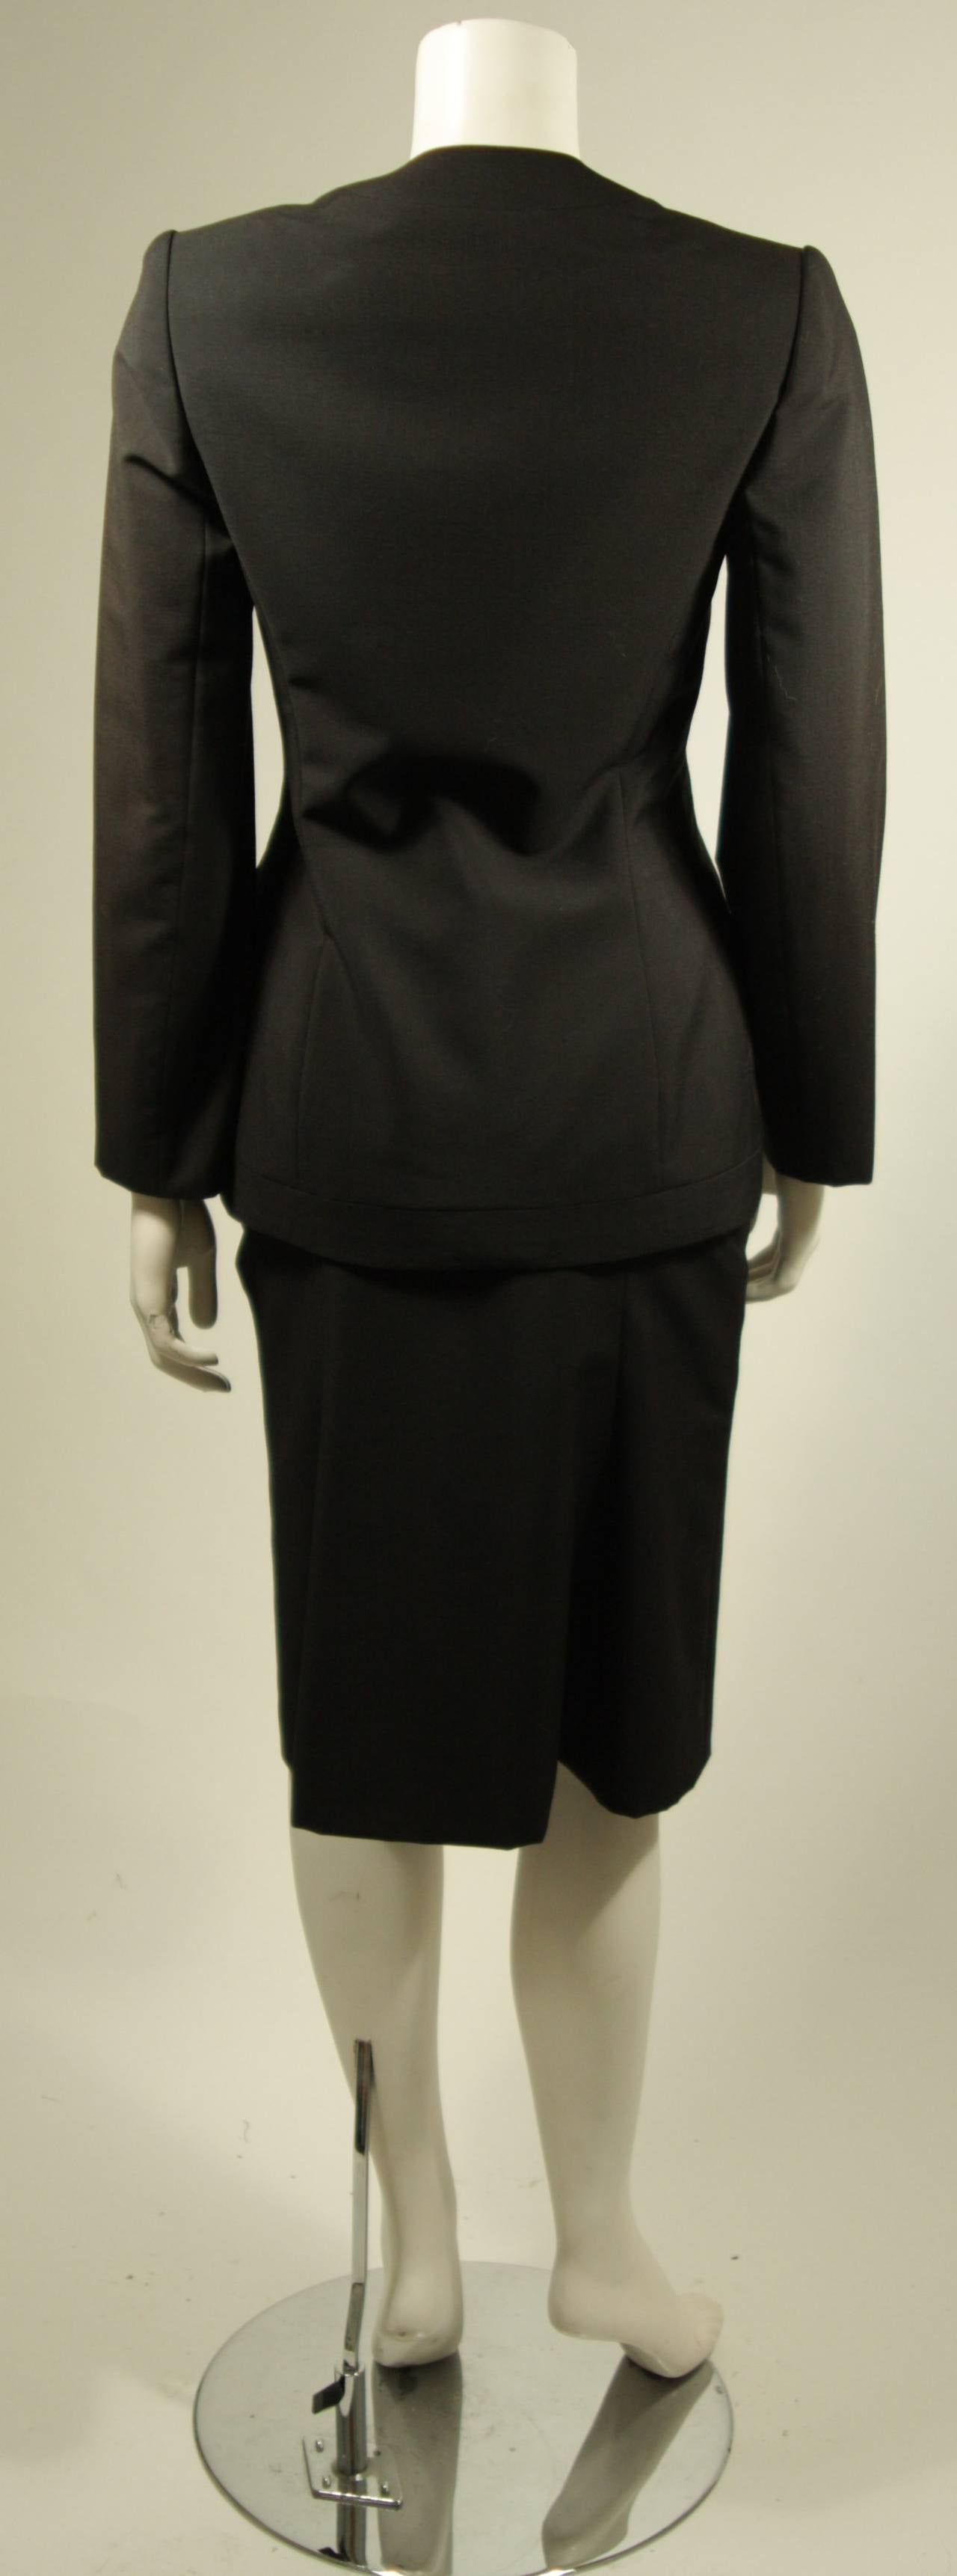 GALANOS HAUTE COUTURE Betsy Bloomingdale Black Skirt Suit with Cut-Out Details 3